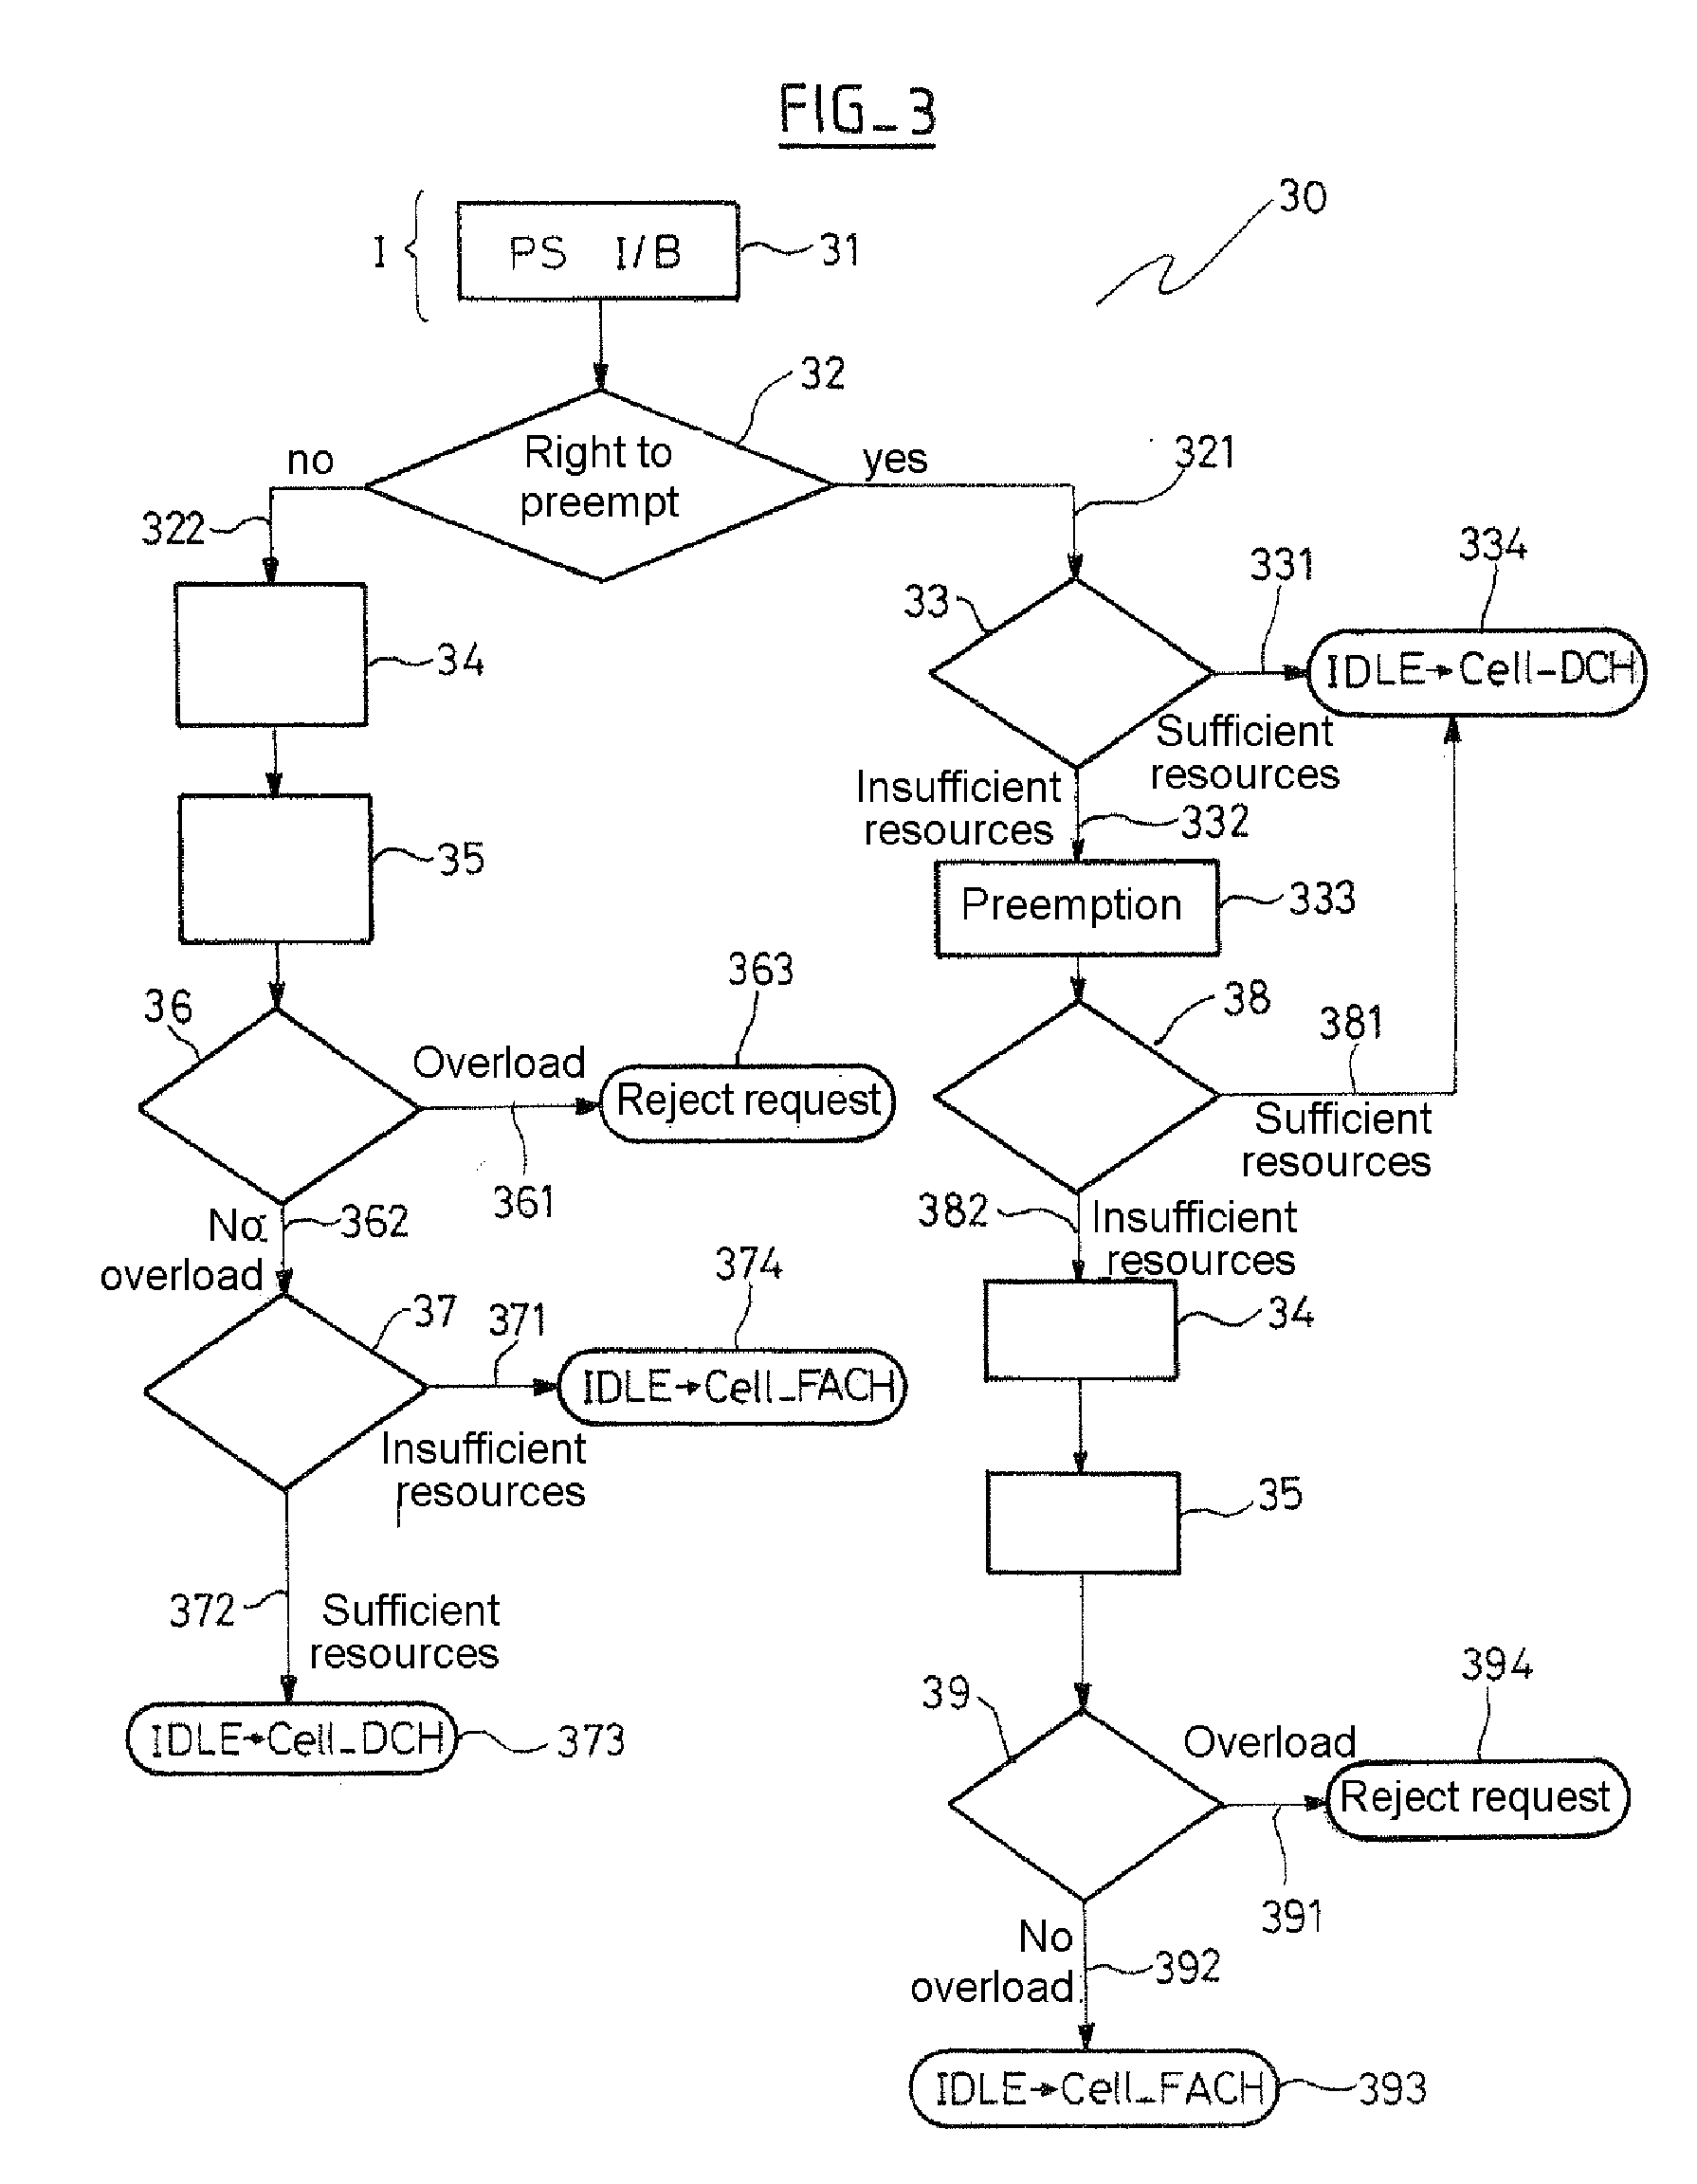 Method and device for management of an overload in a cell of a radio communication network, corresponding uses, computer program and storage means